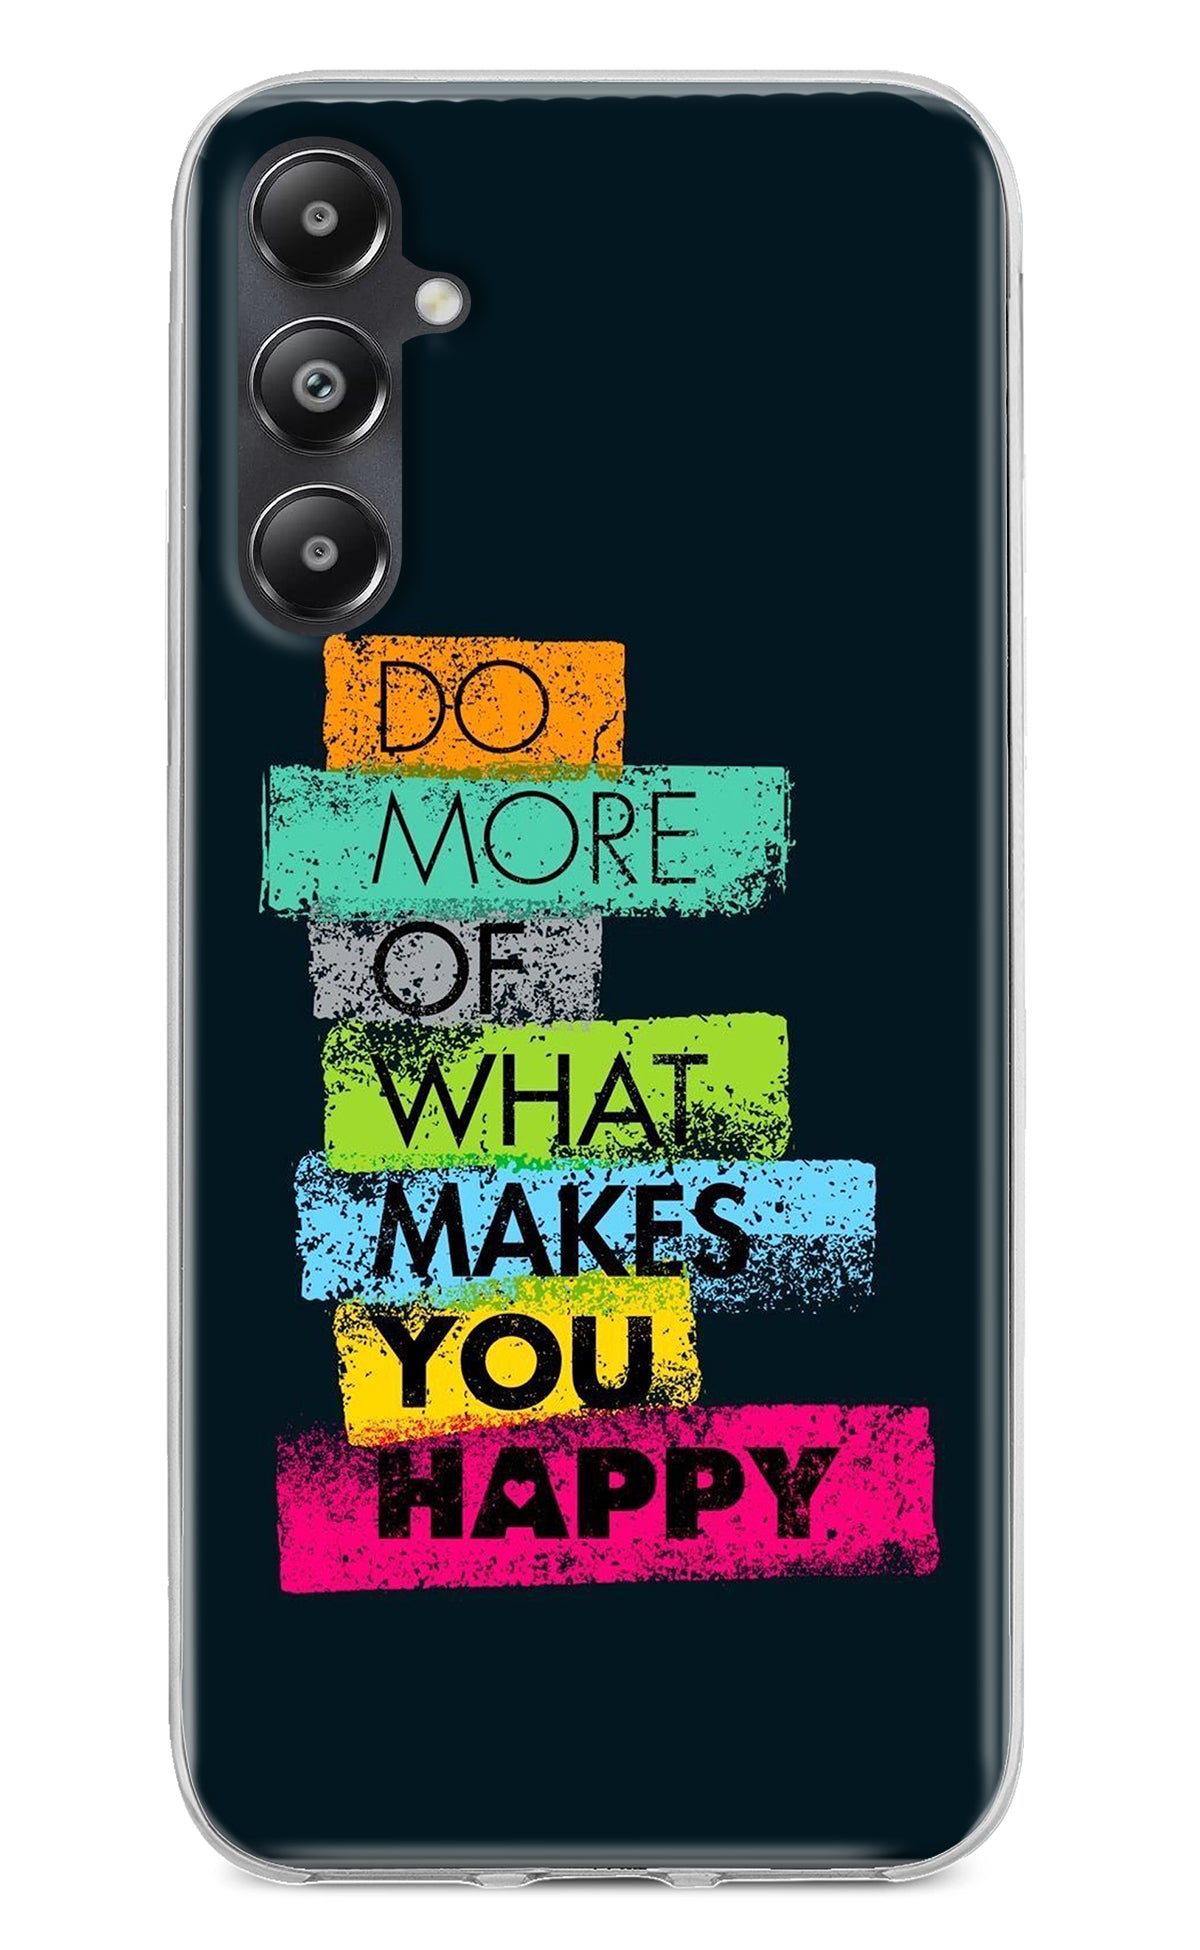 Do More Of What Makes You Happy Samsung A05s Back Cover